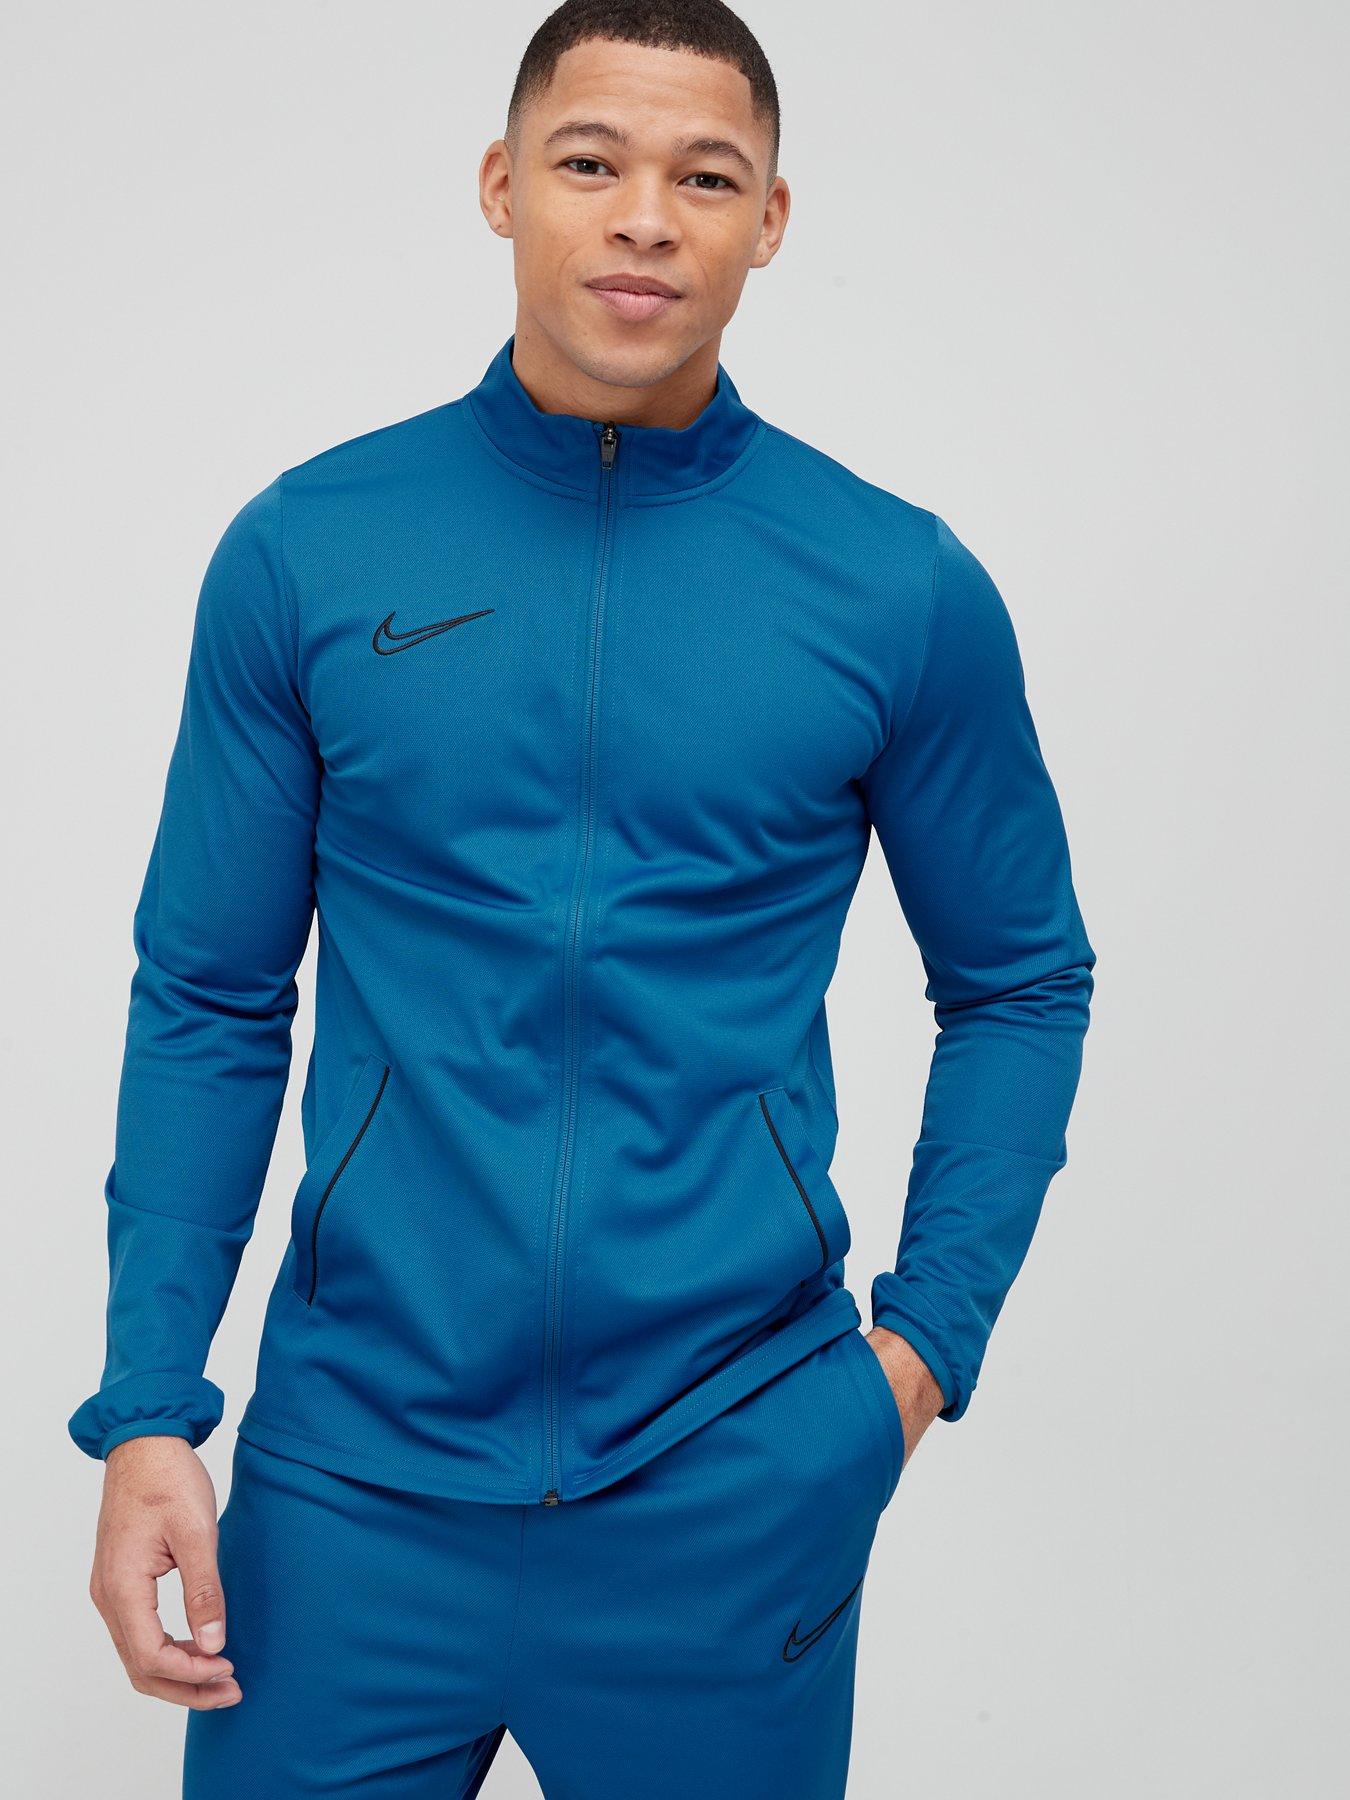  Mens Academy 21 Dry Tracksuit